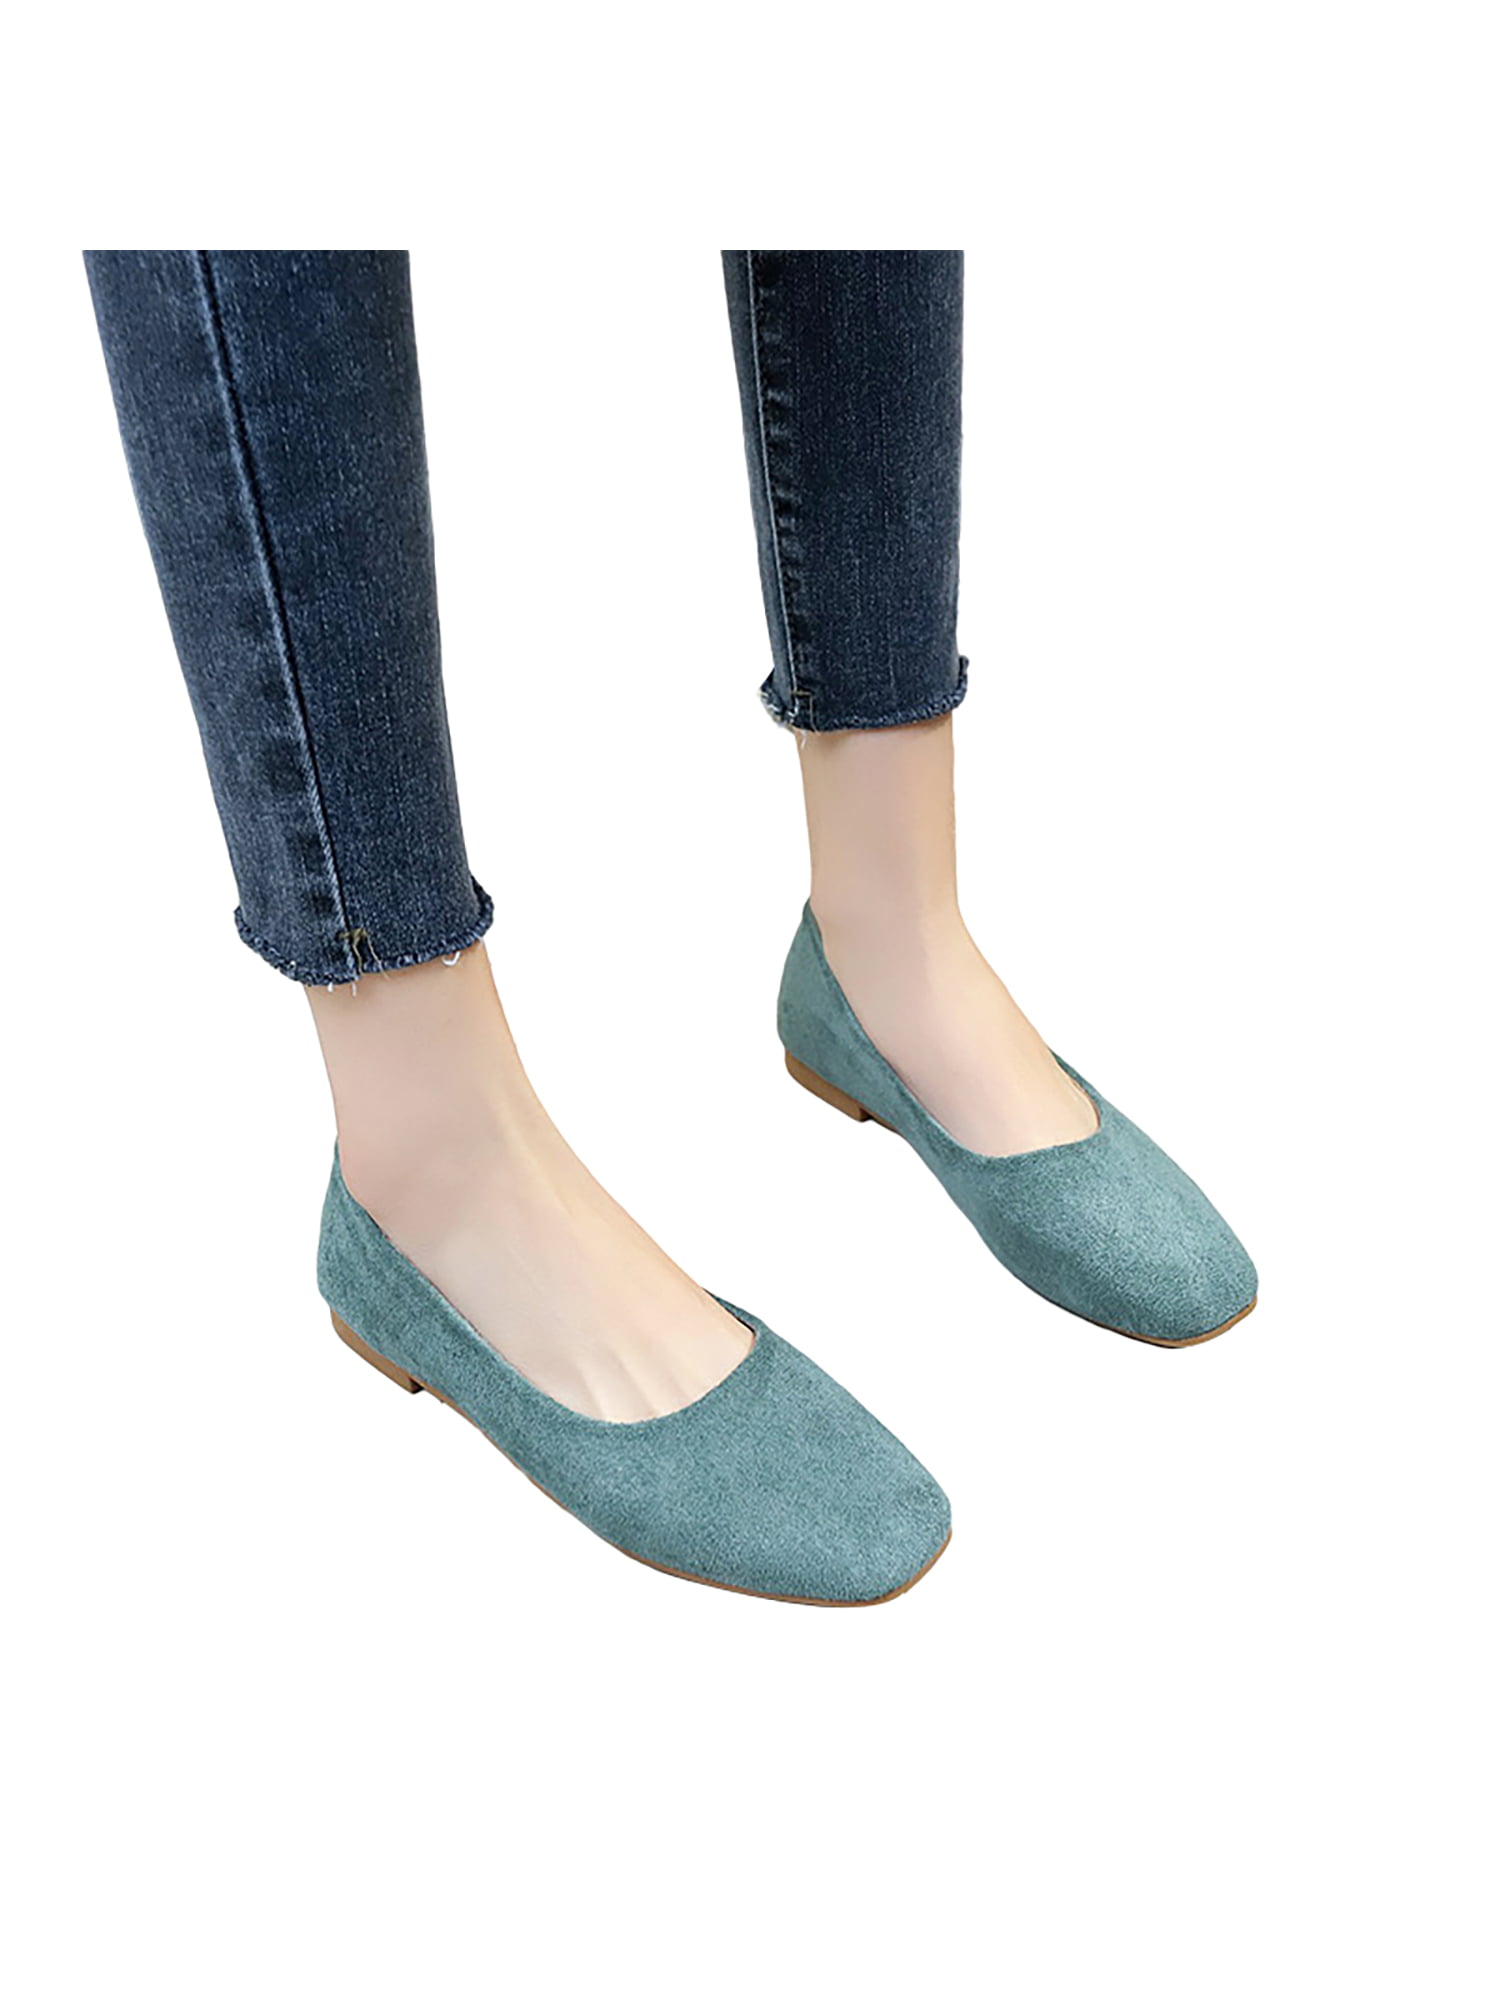 Women Small Slim Ballerina Ballet Flats Shoes Slip On Boat Loafers Pump Shoes